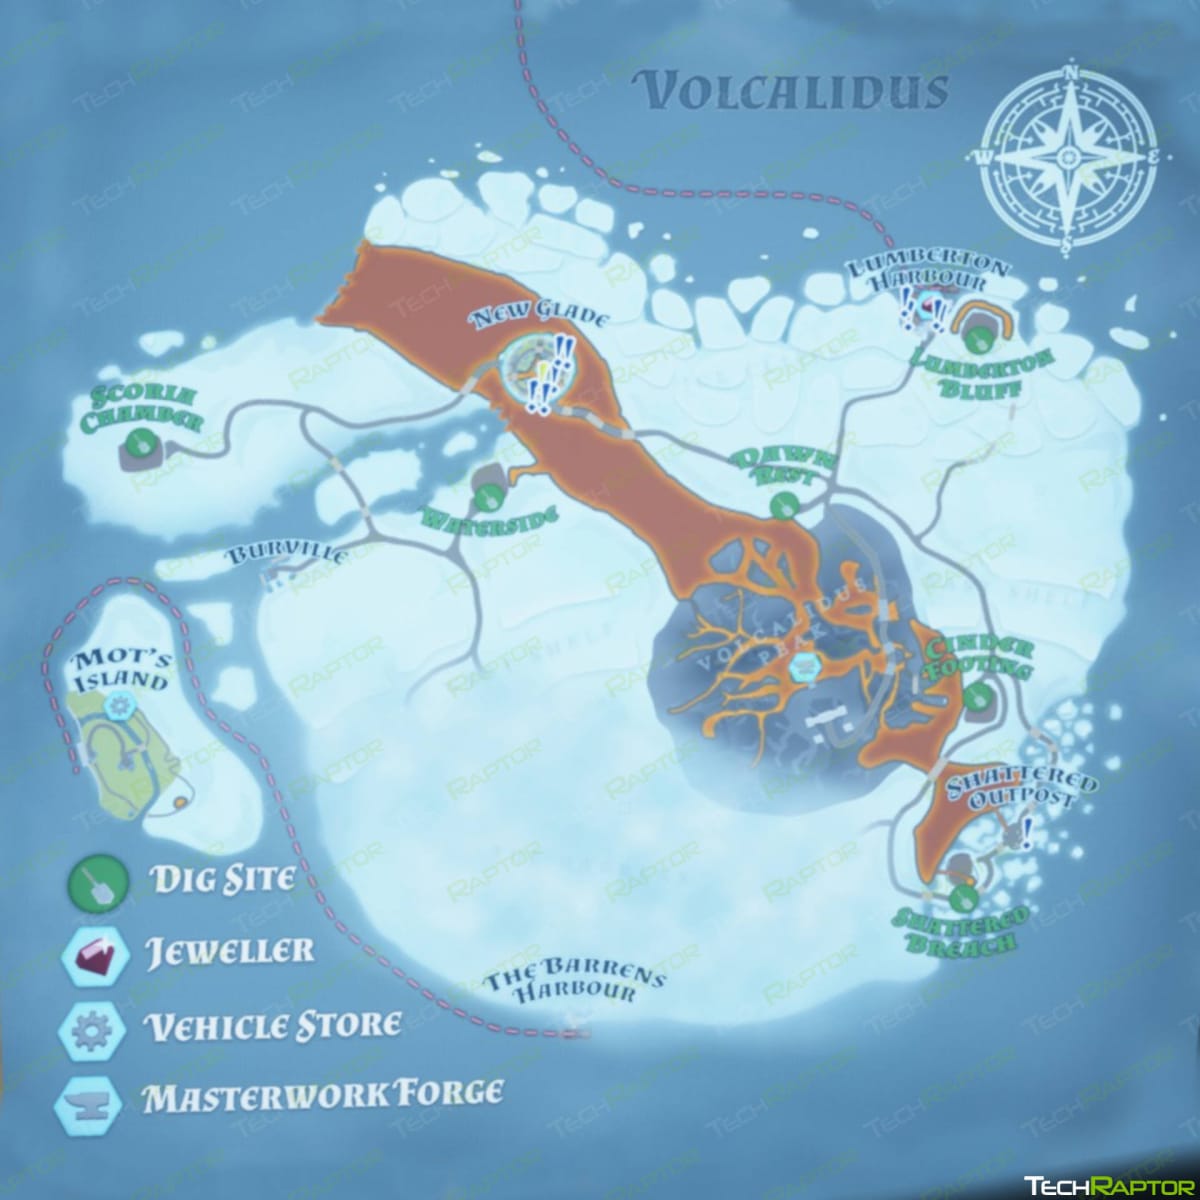 A Map of the Volcalidus region in Hydroneer